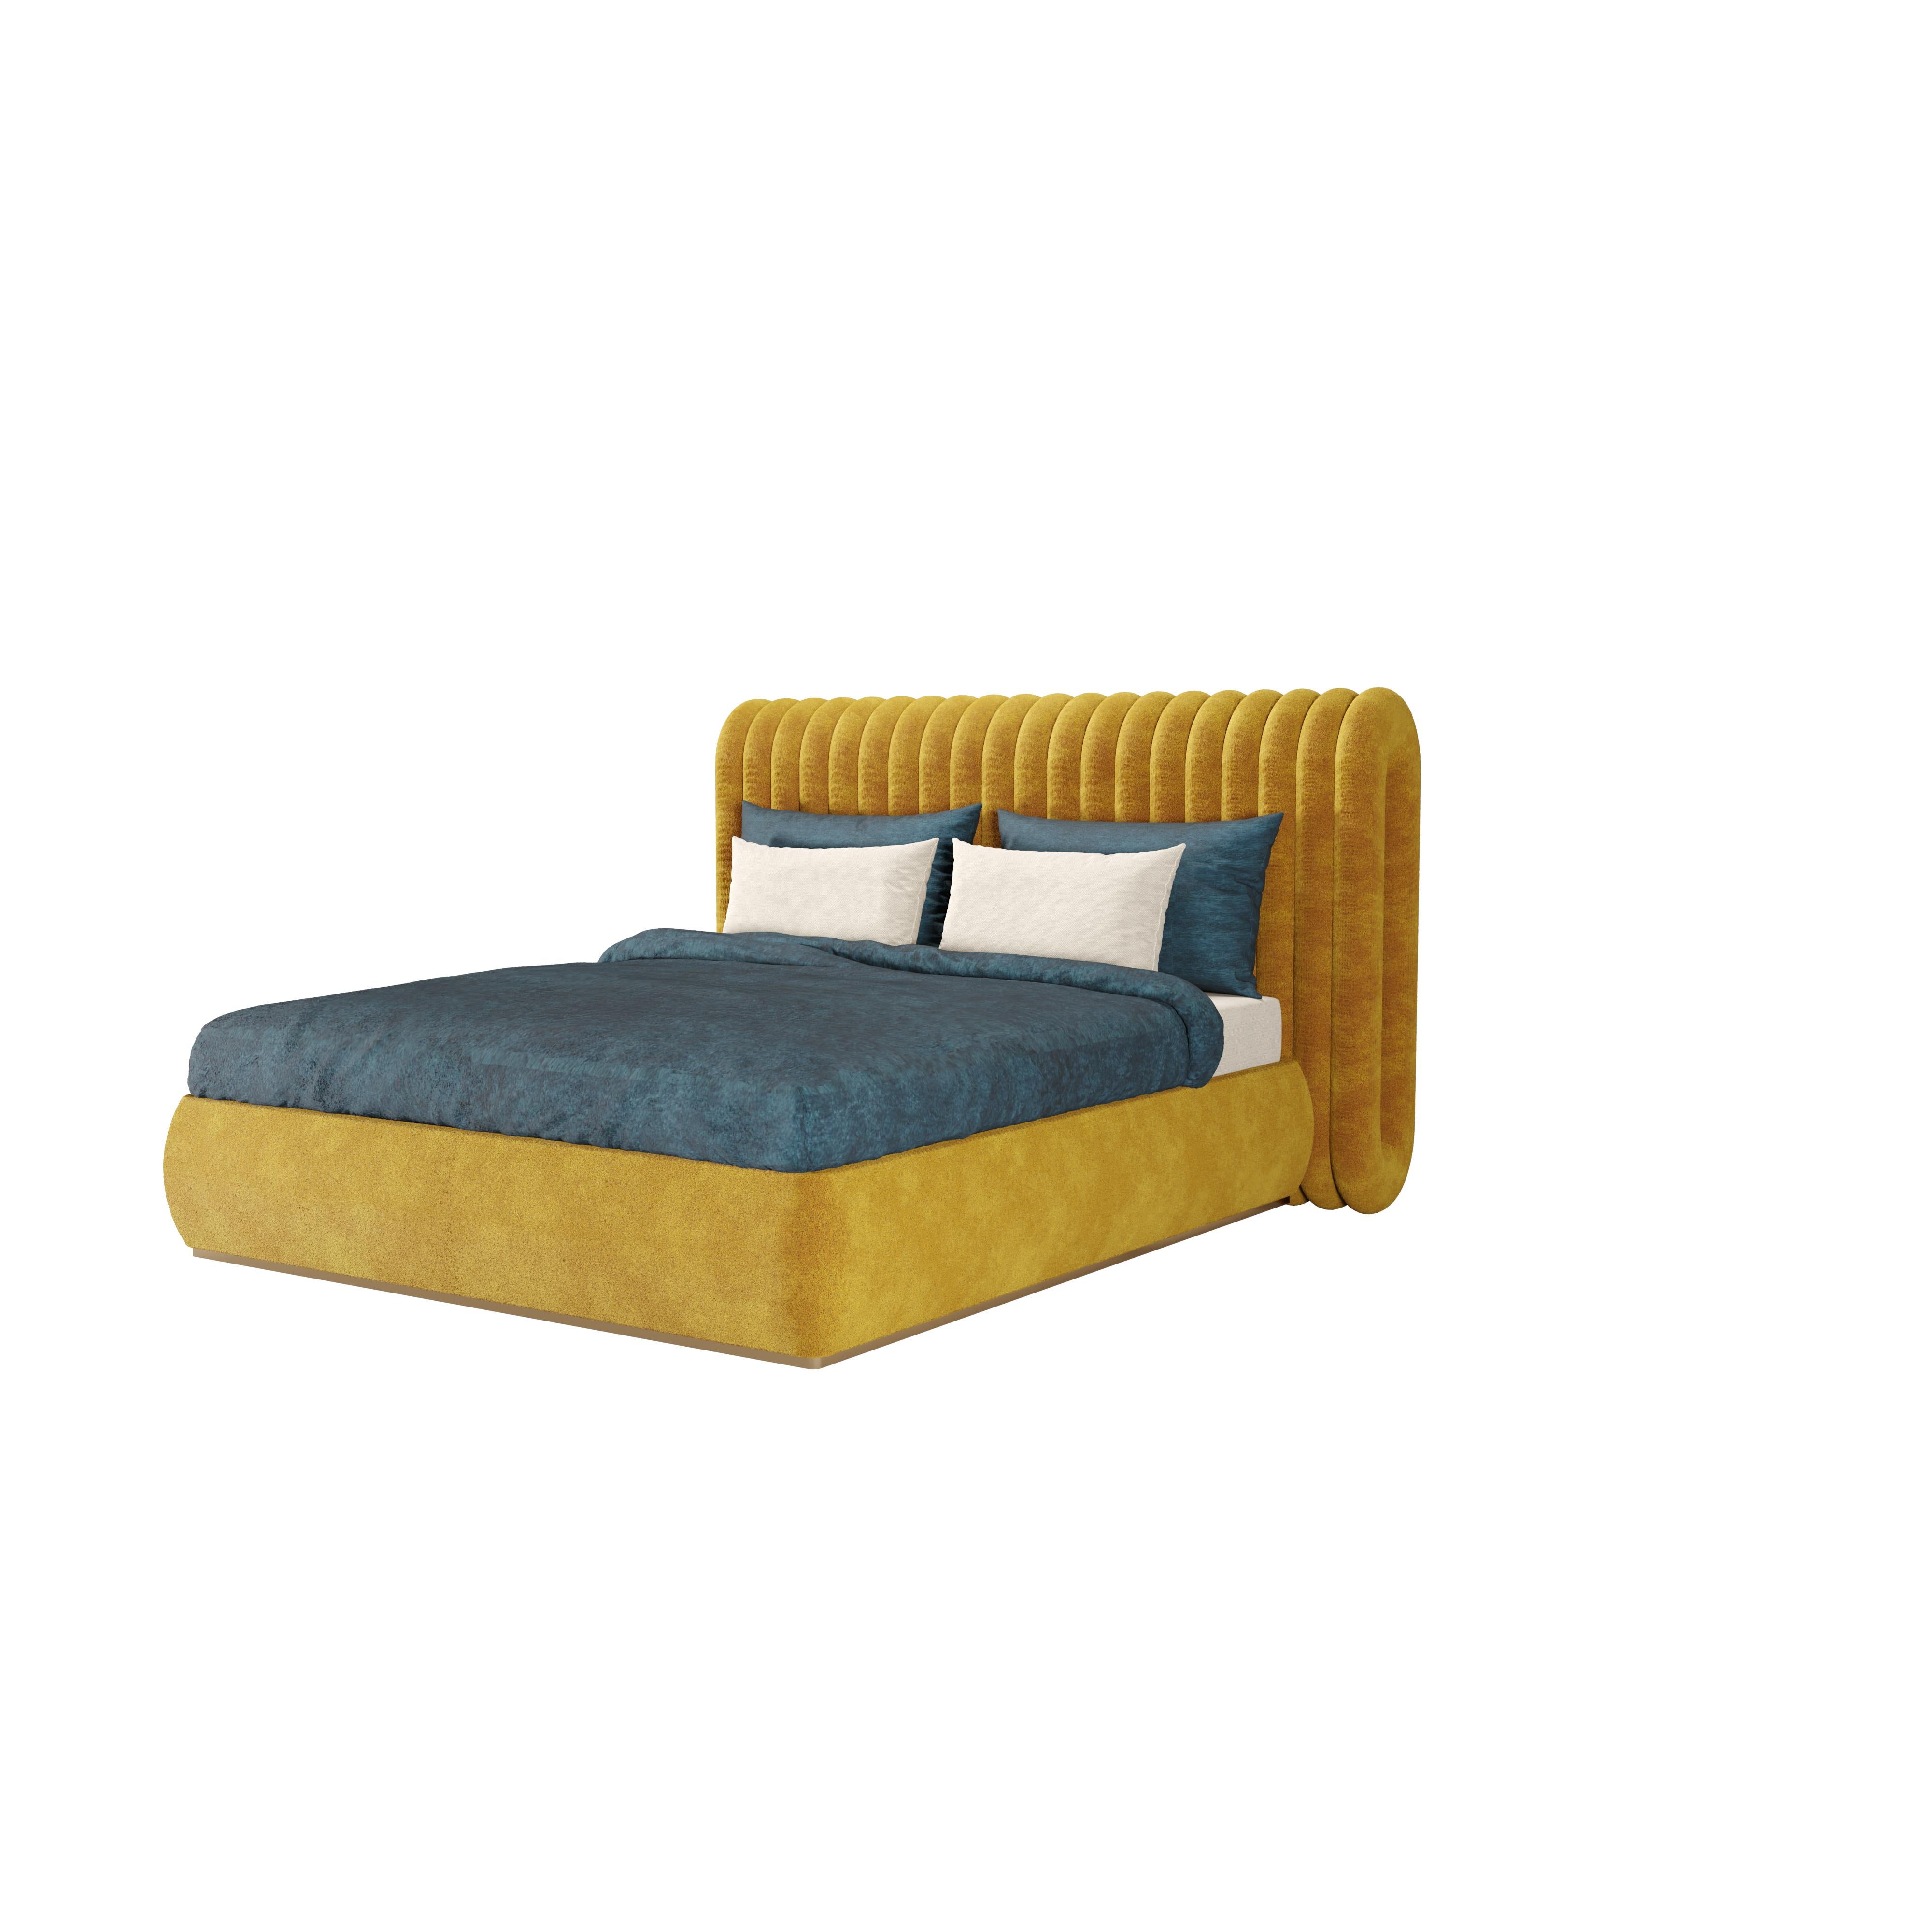 Contemporary 21st Century Post-Future II Bed Upholstery For Sale